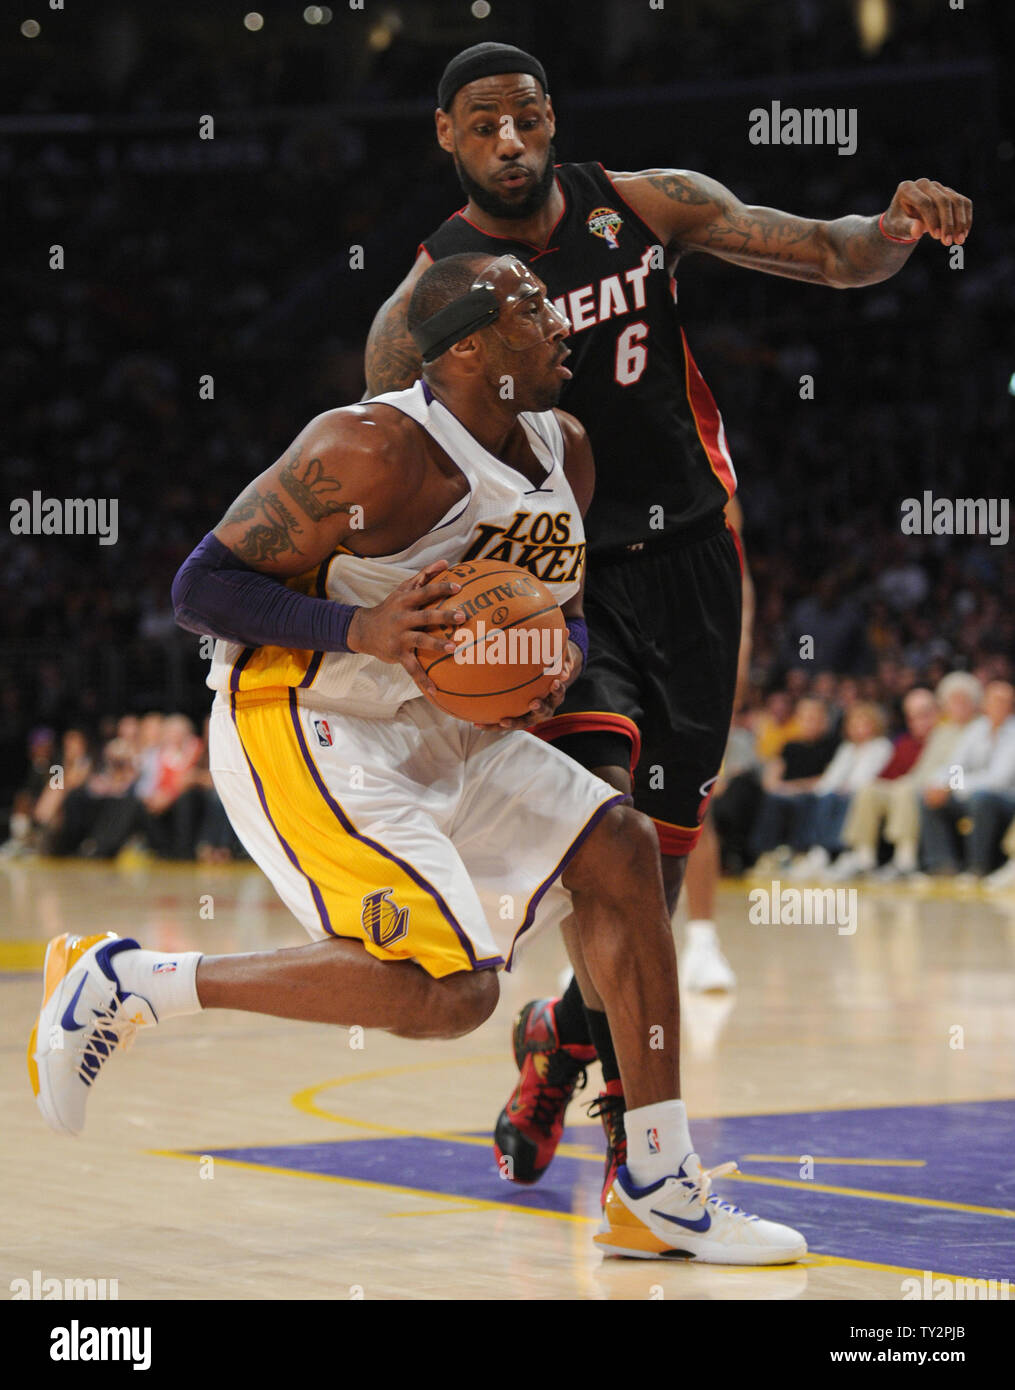 Los Angeles Lakers' Kobe Bryant drives to the basket past New